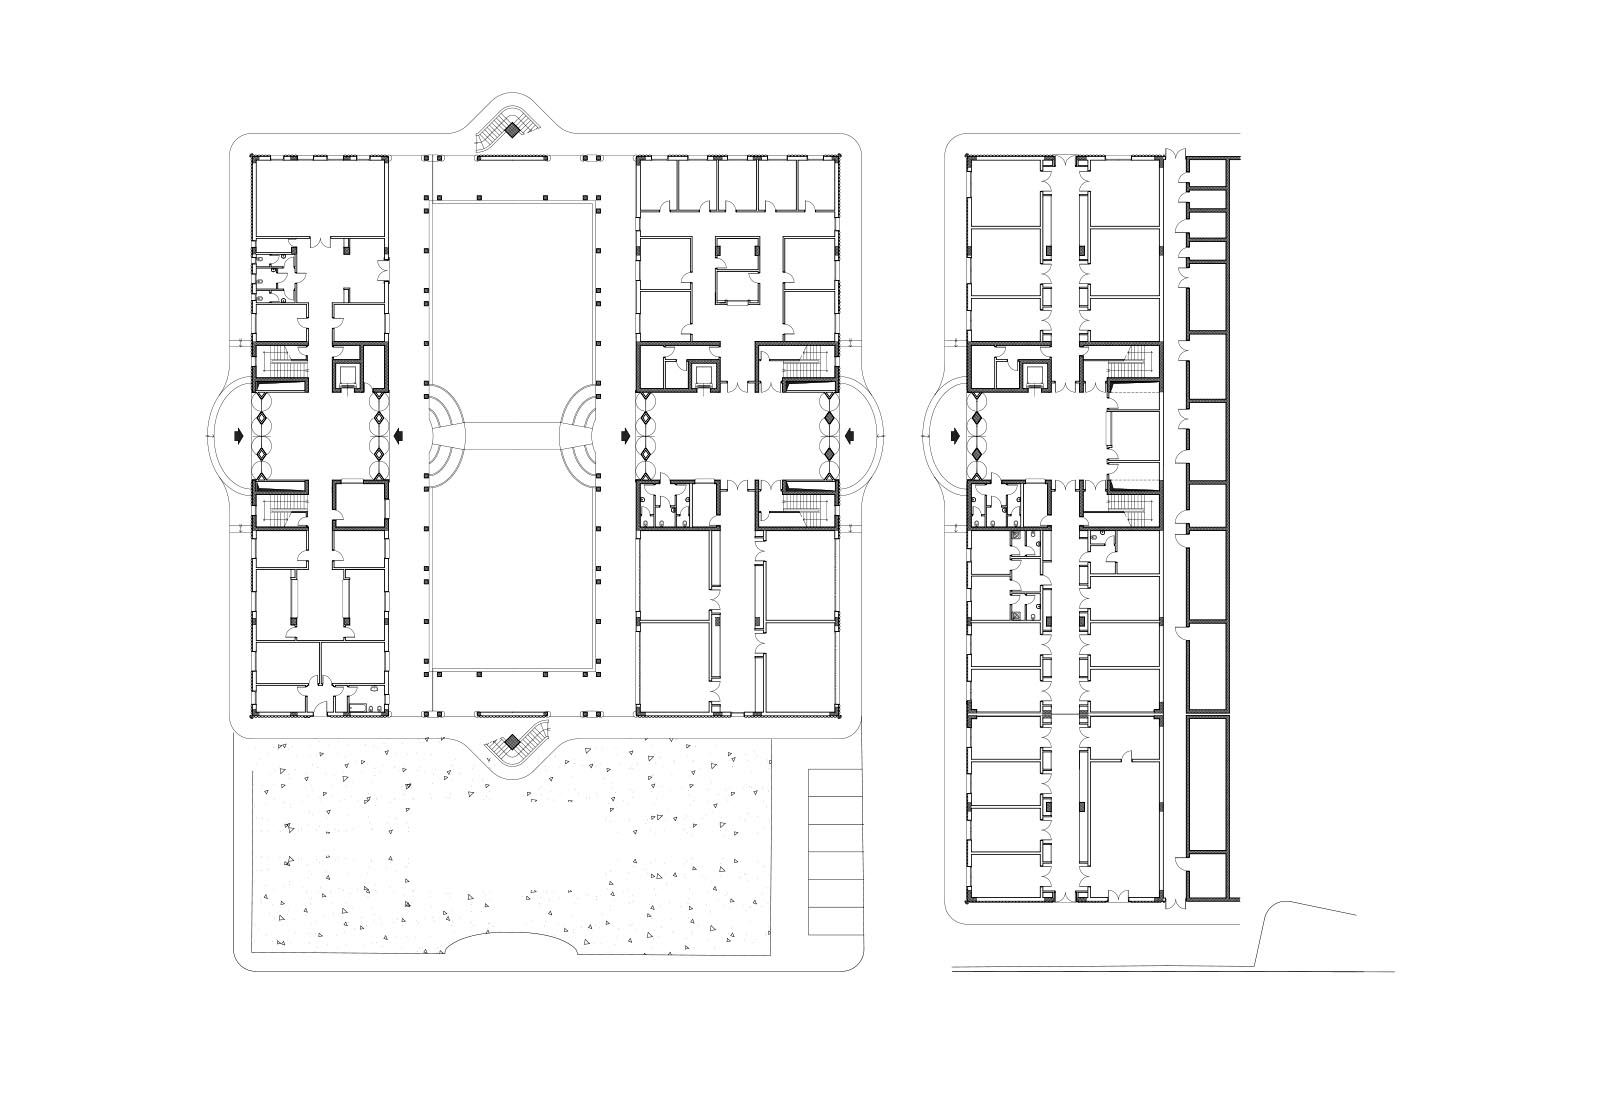 Faculty of Veterinary in Matelica - General project plan ground floor